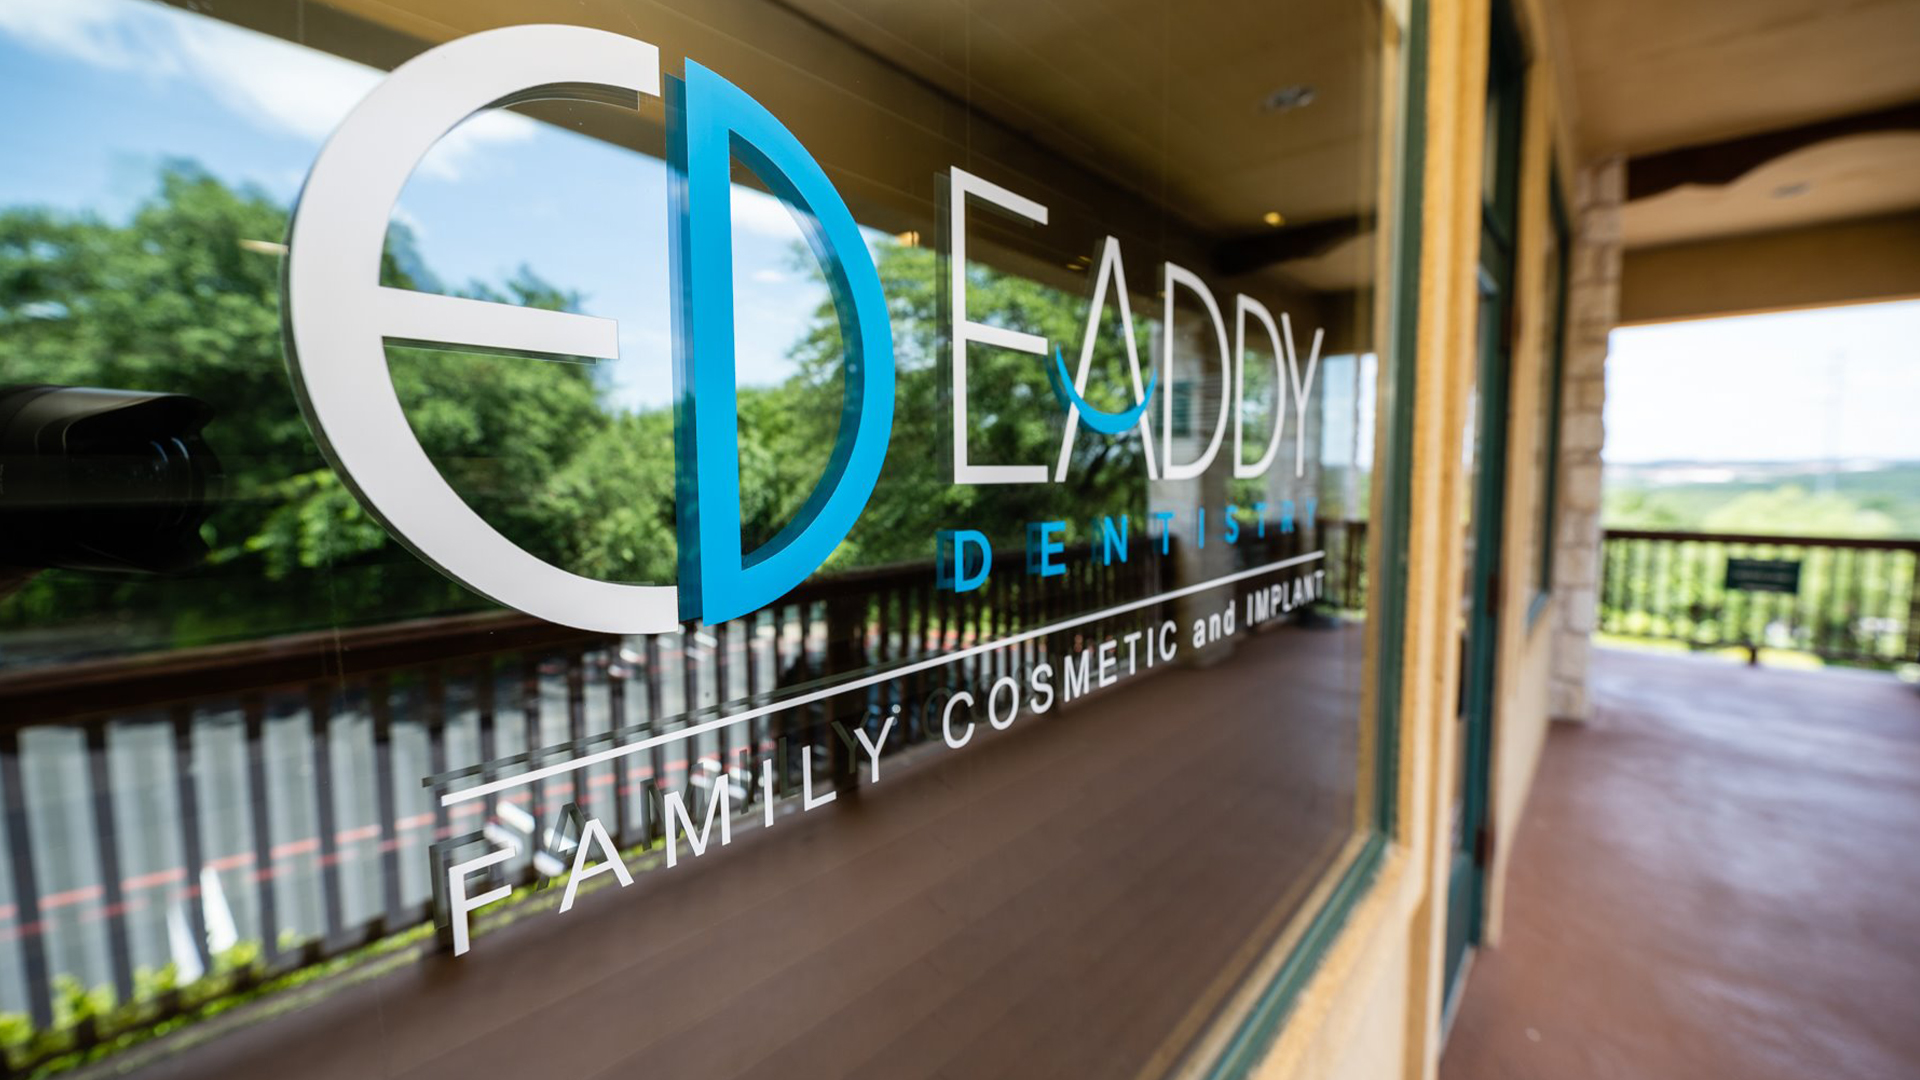 Eaddy Cosmetic and Implant Dentistry